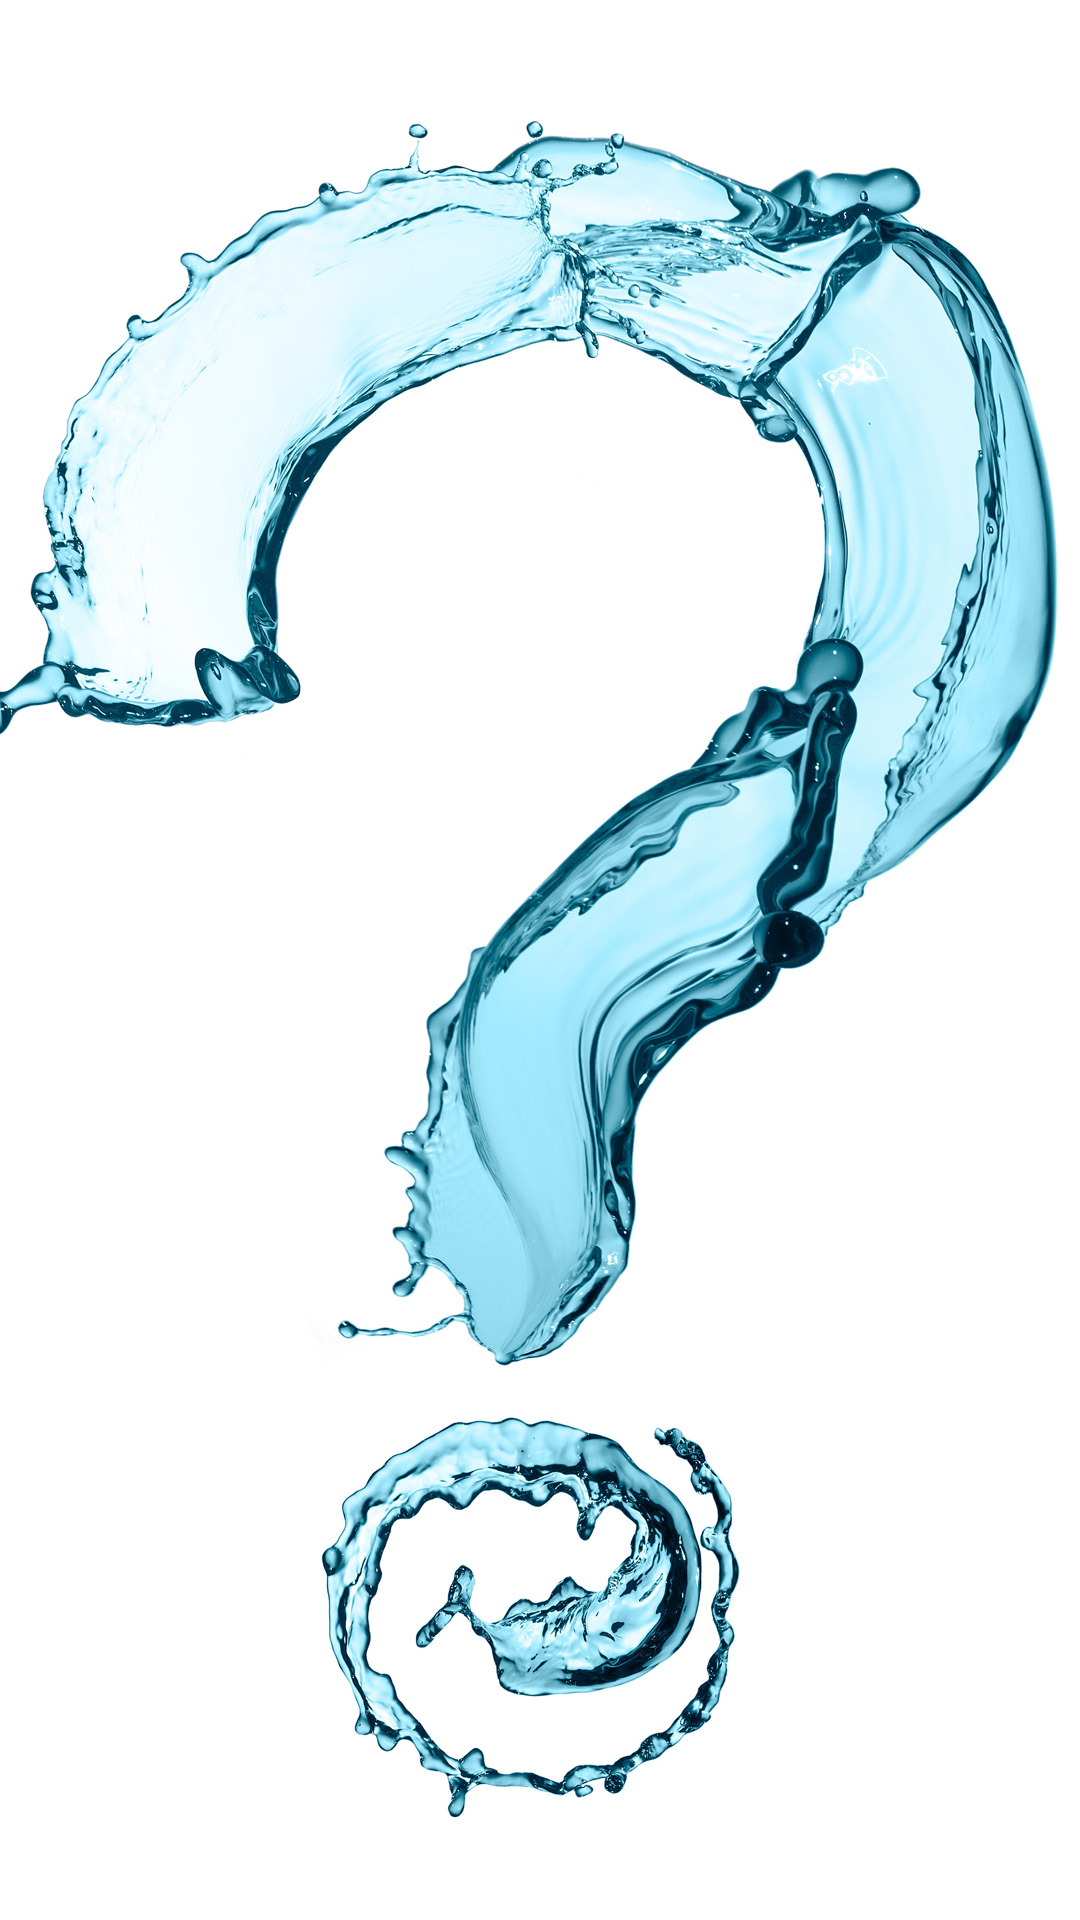 Creative Water Question Mark Android Wallpaper - HD Wallpaper 